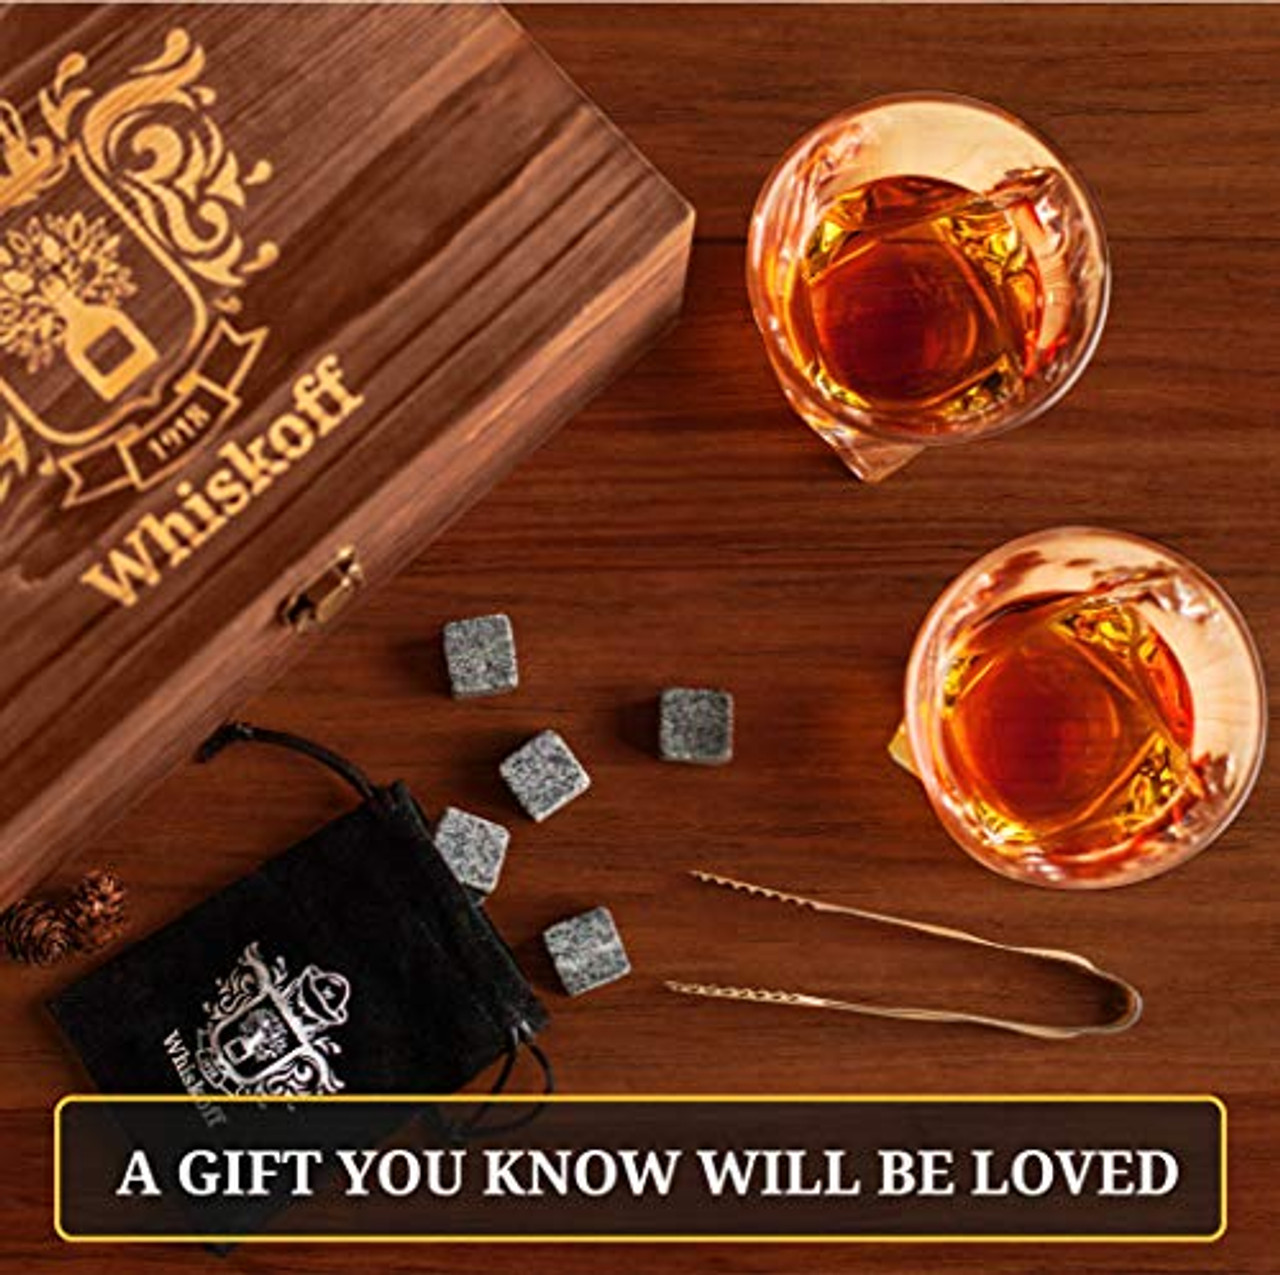 Whiskey Bourbon Glass & Stone Gift Set With Wooden Case